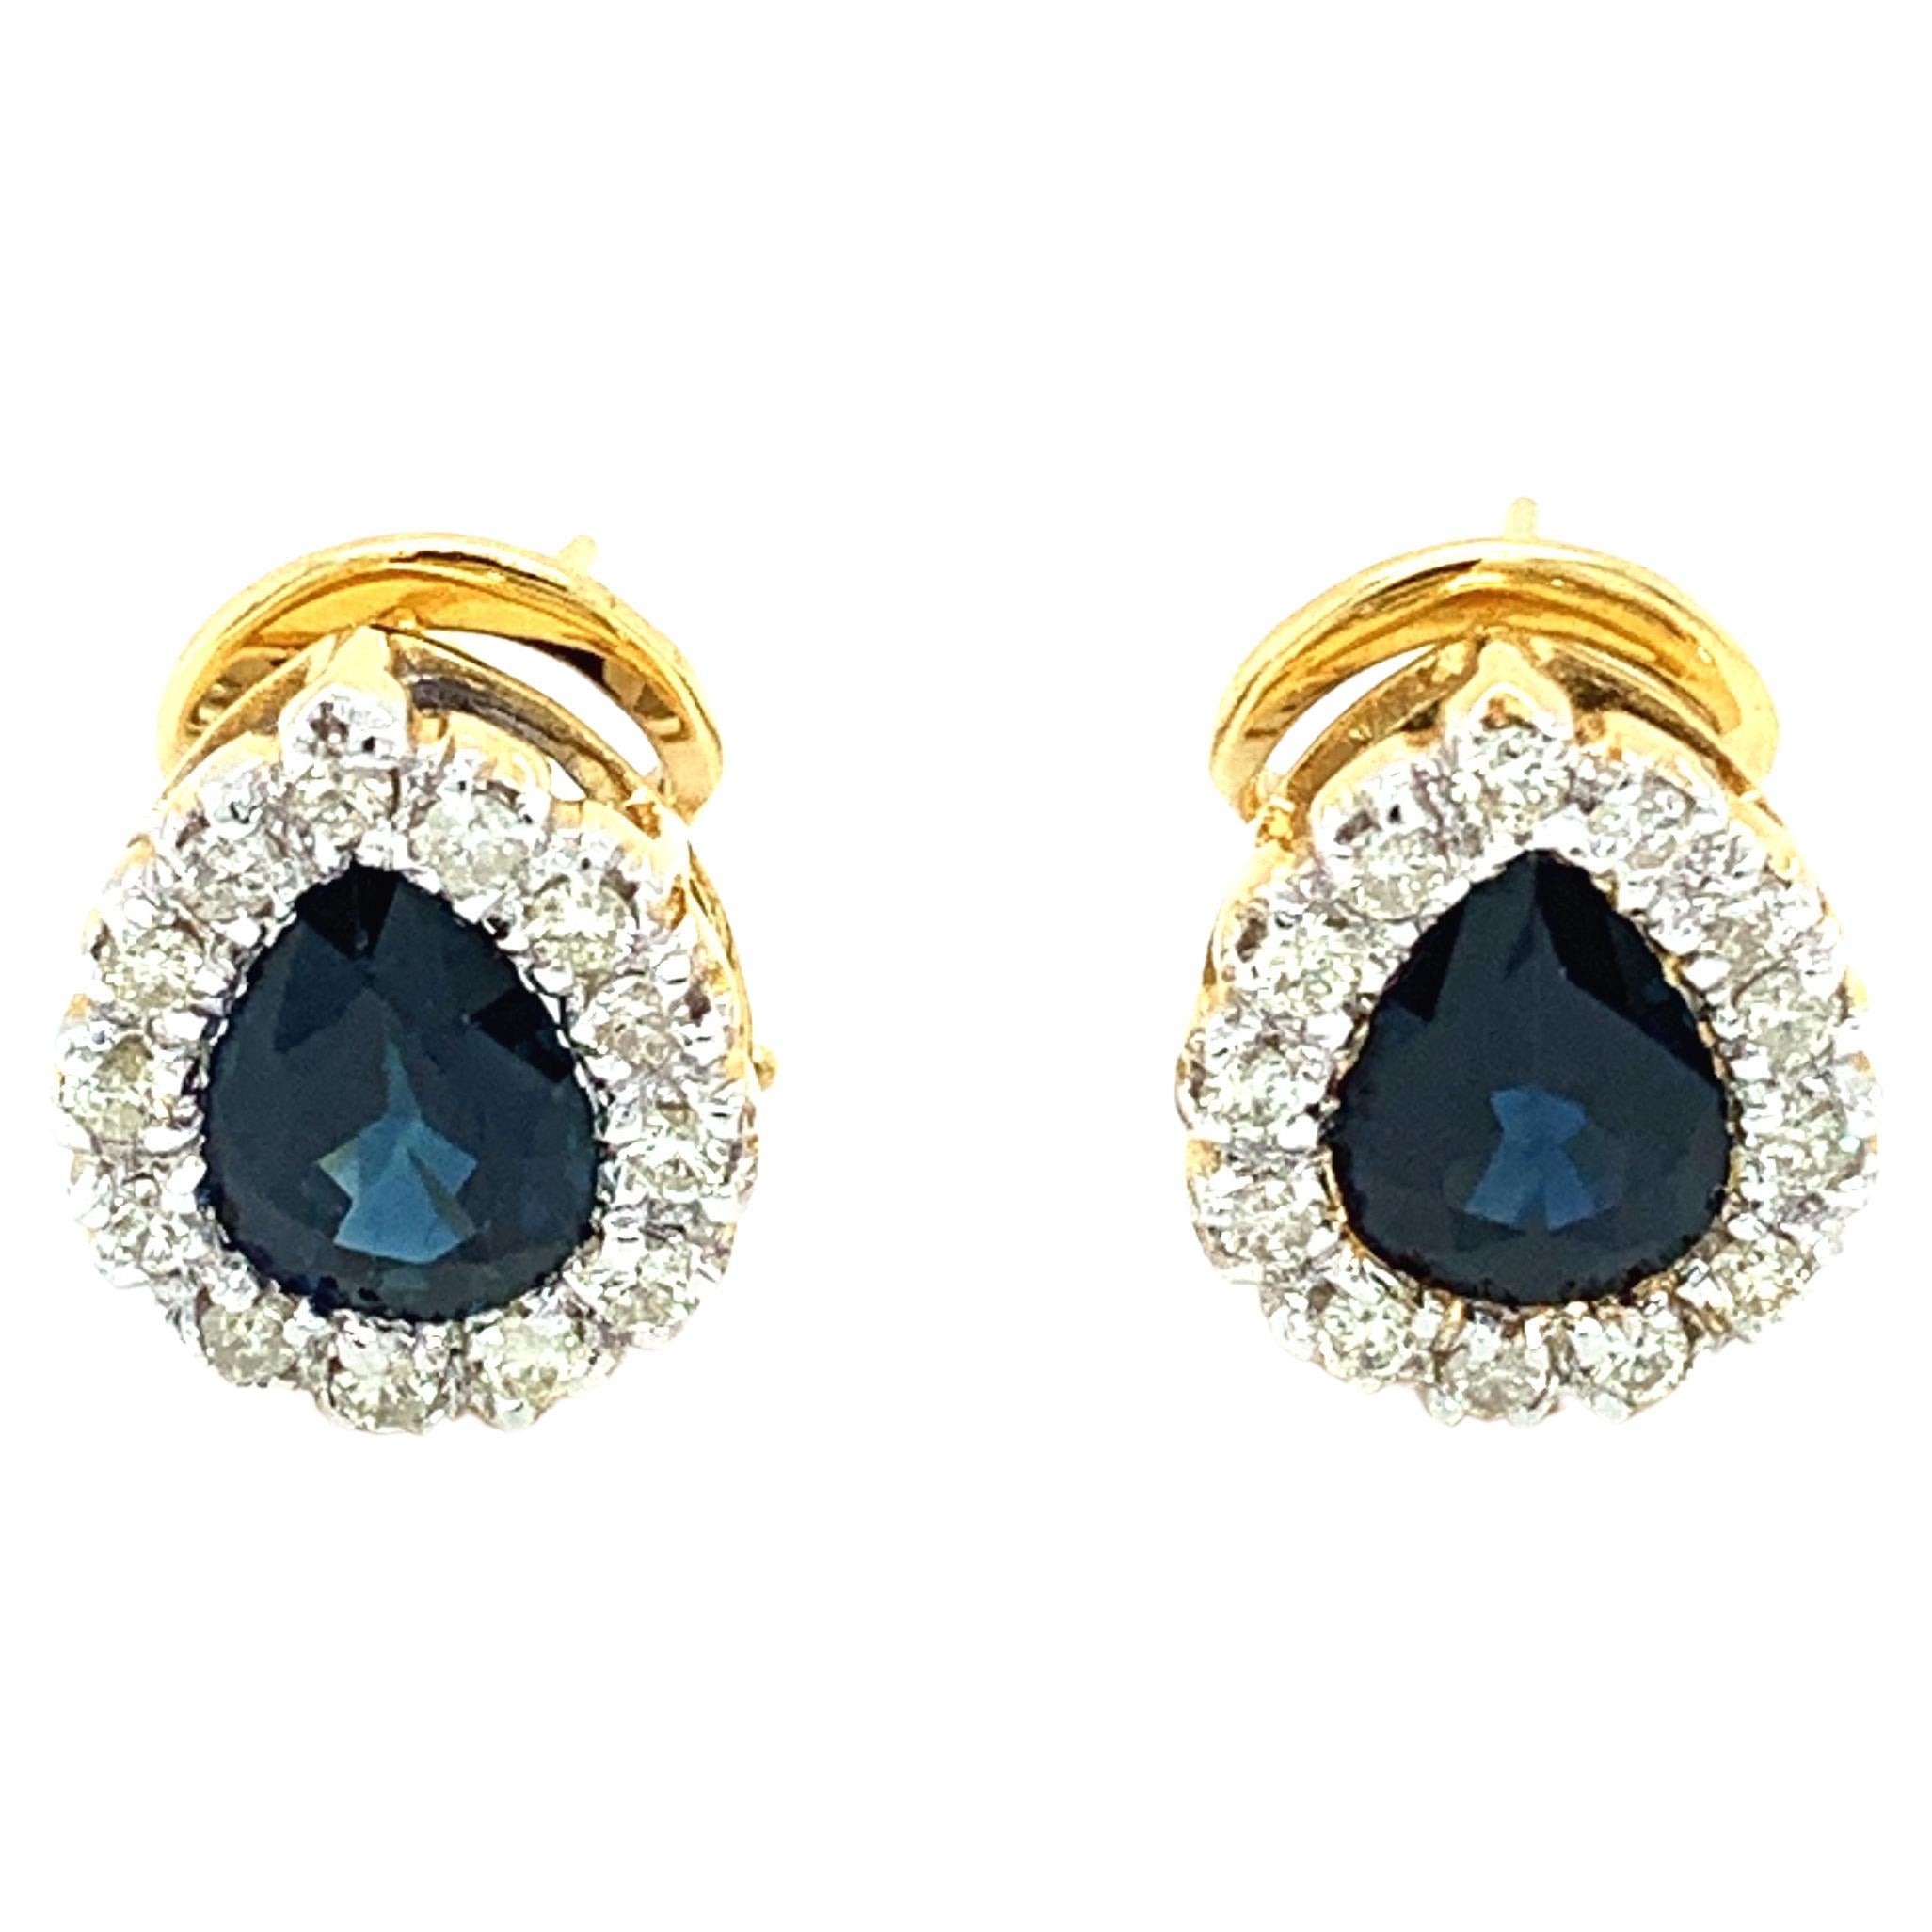 Sapphire and diamond art deco post and clip earrings 18k yellow gold